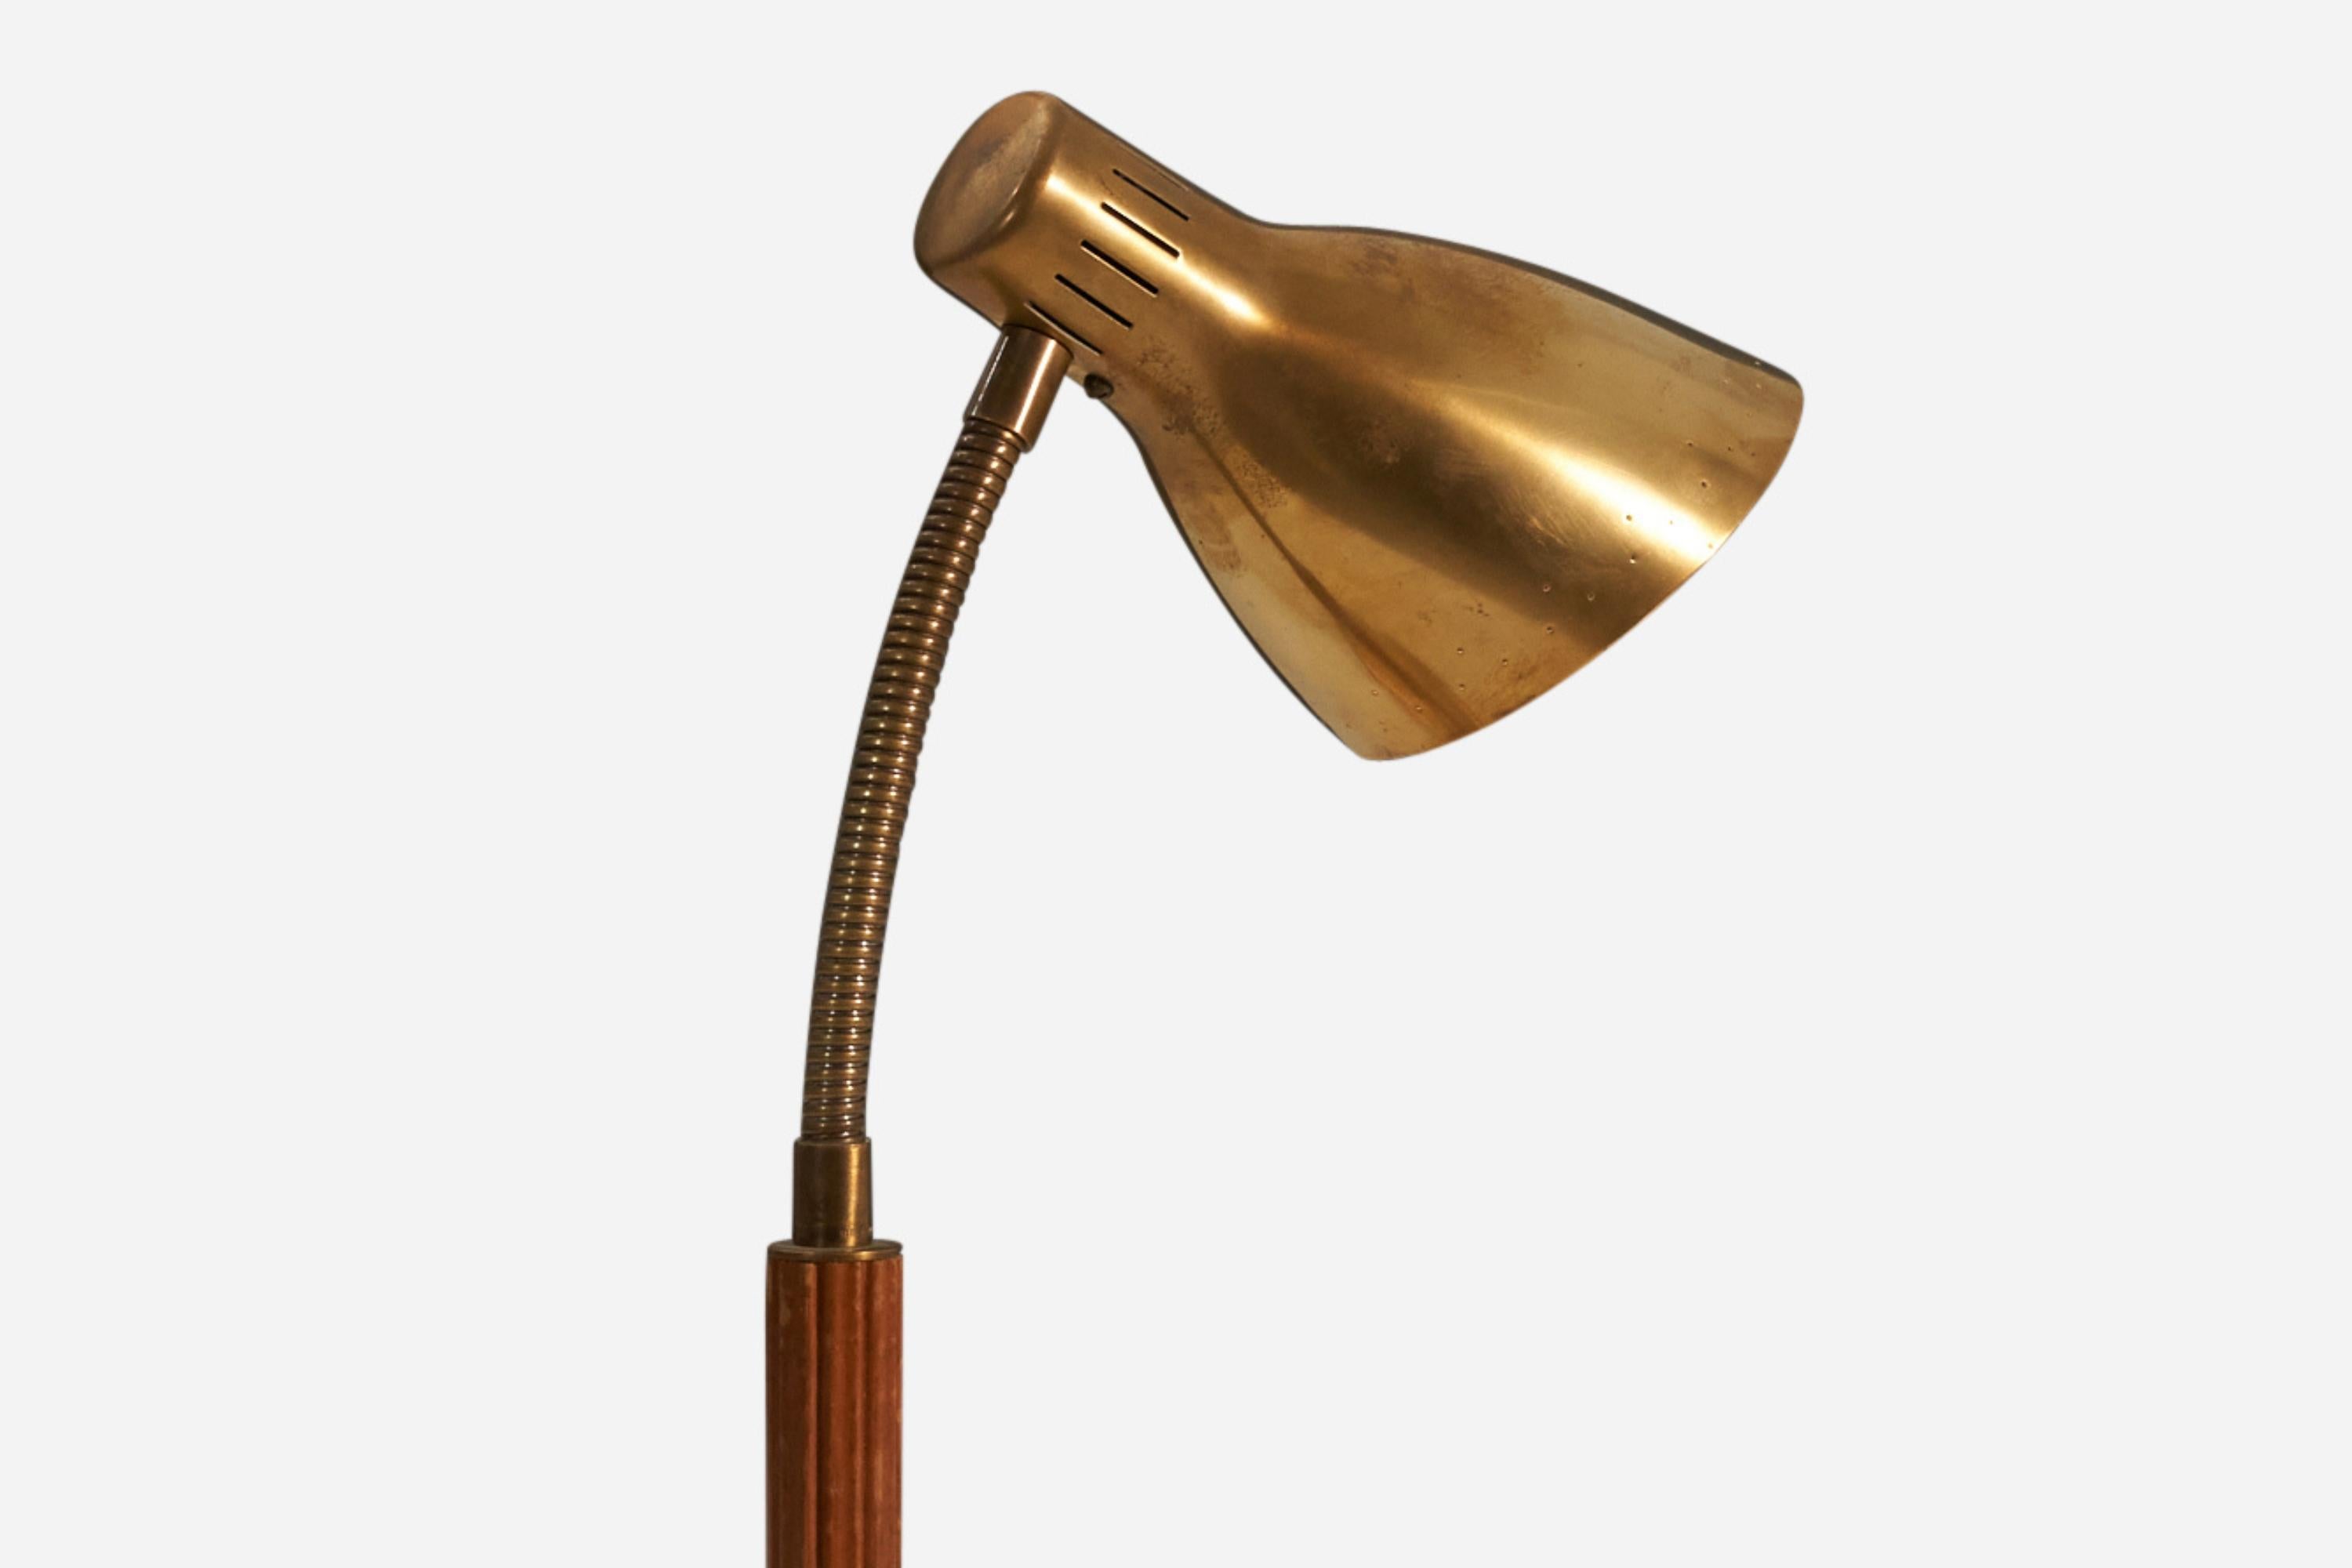 A highly functionalist adjustable table lamp / desk light. Documented to be produced by Böhlmarks, late 1940s or early 1950s, design attributed to Carl-Axel Acking, for reference see lamps documented to Acking with closely similar screens, also